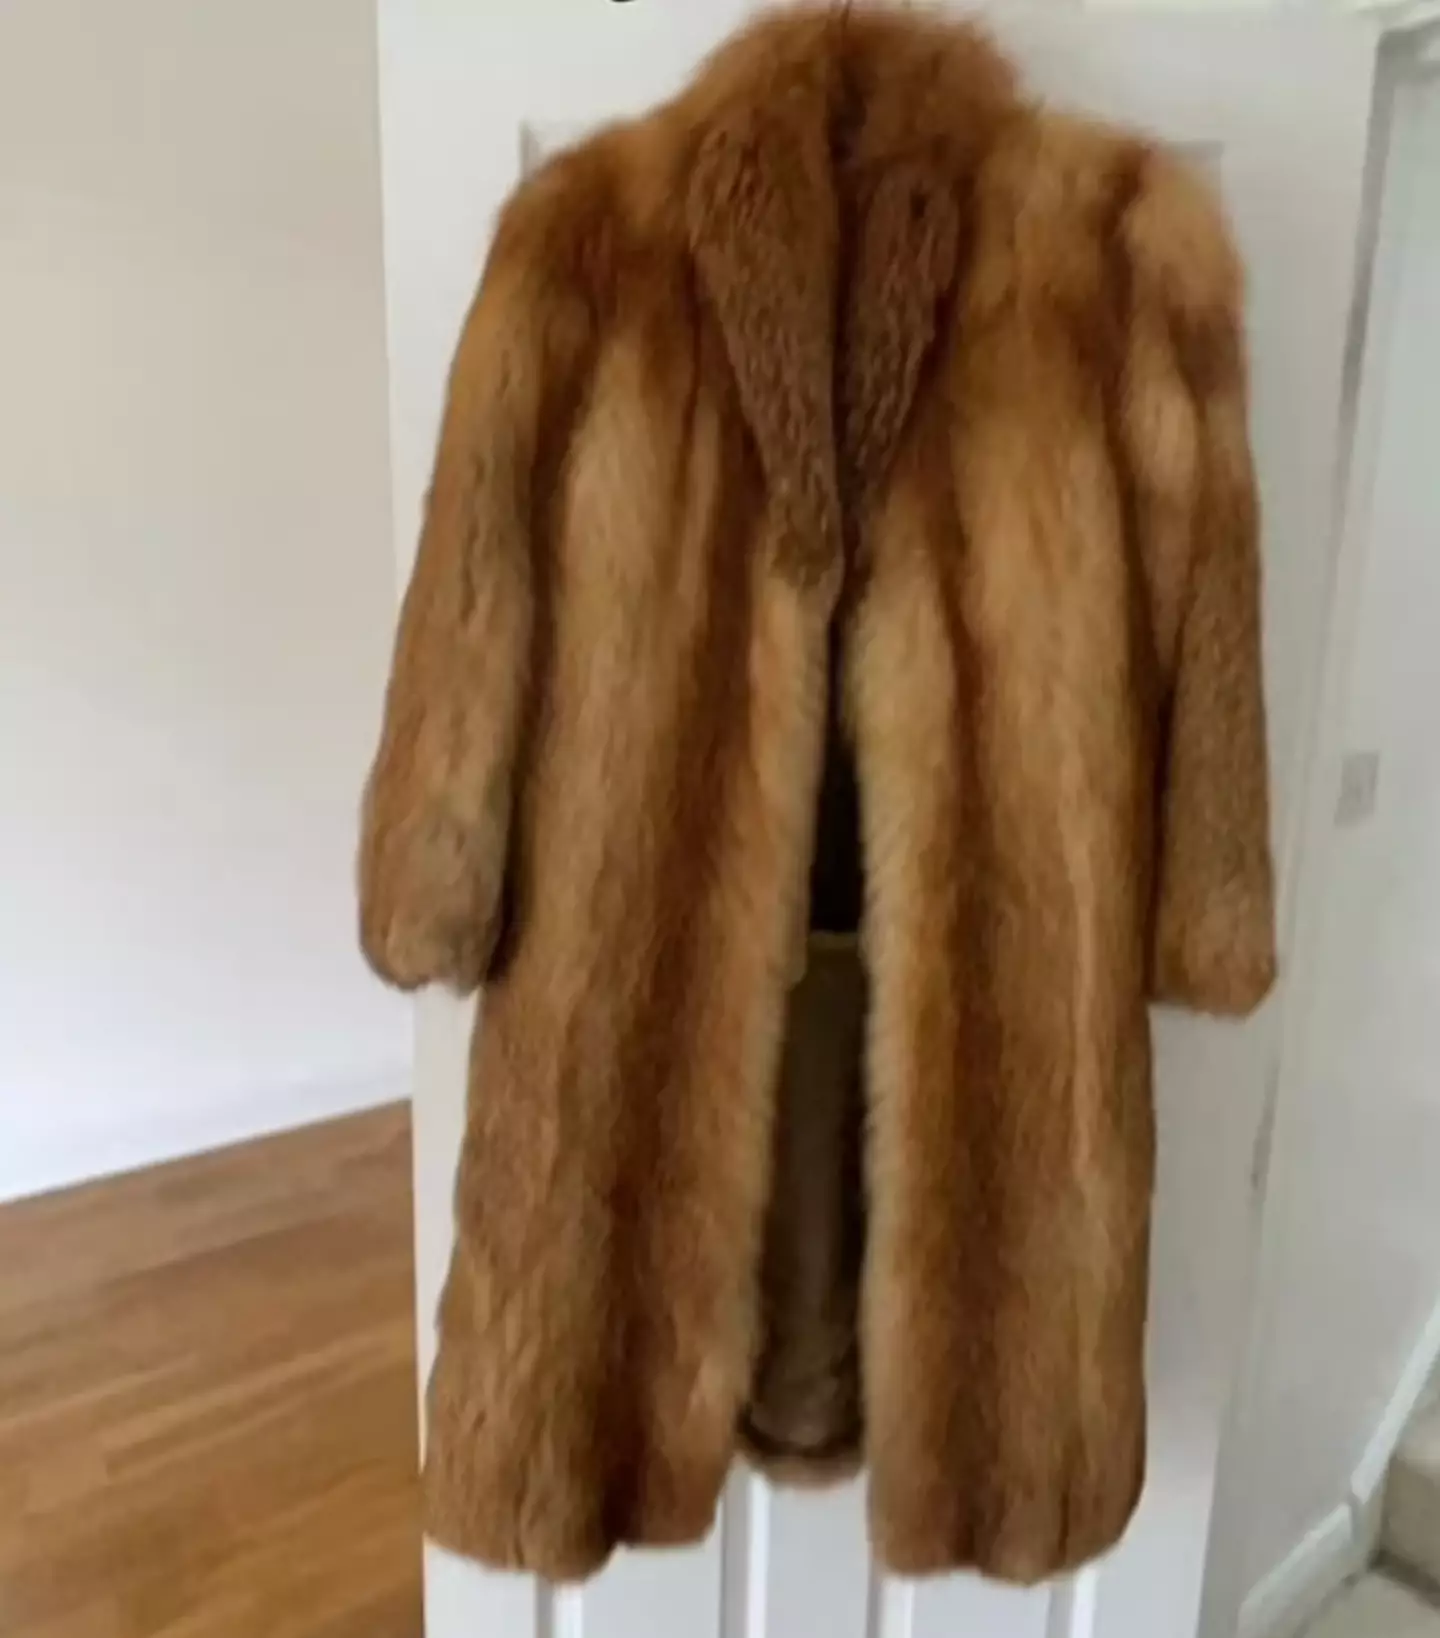 The reality star was slammed for selling a real fur coat.